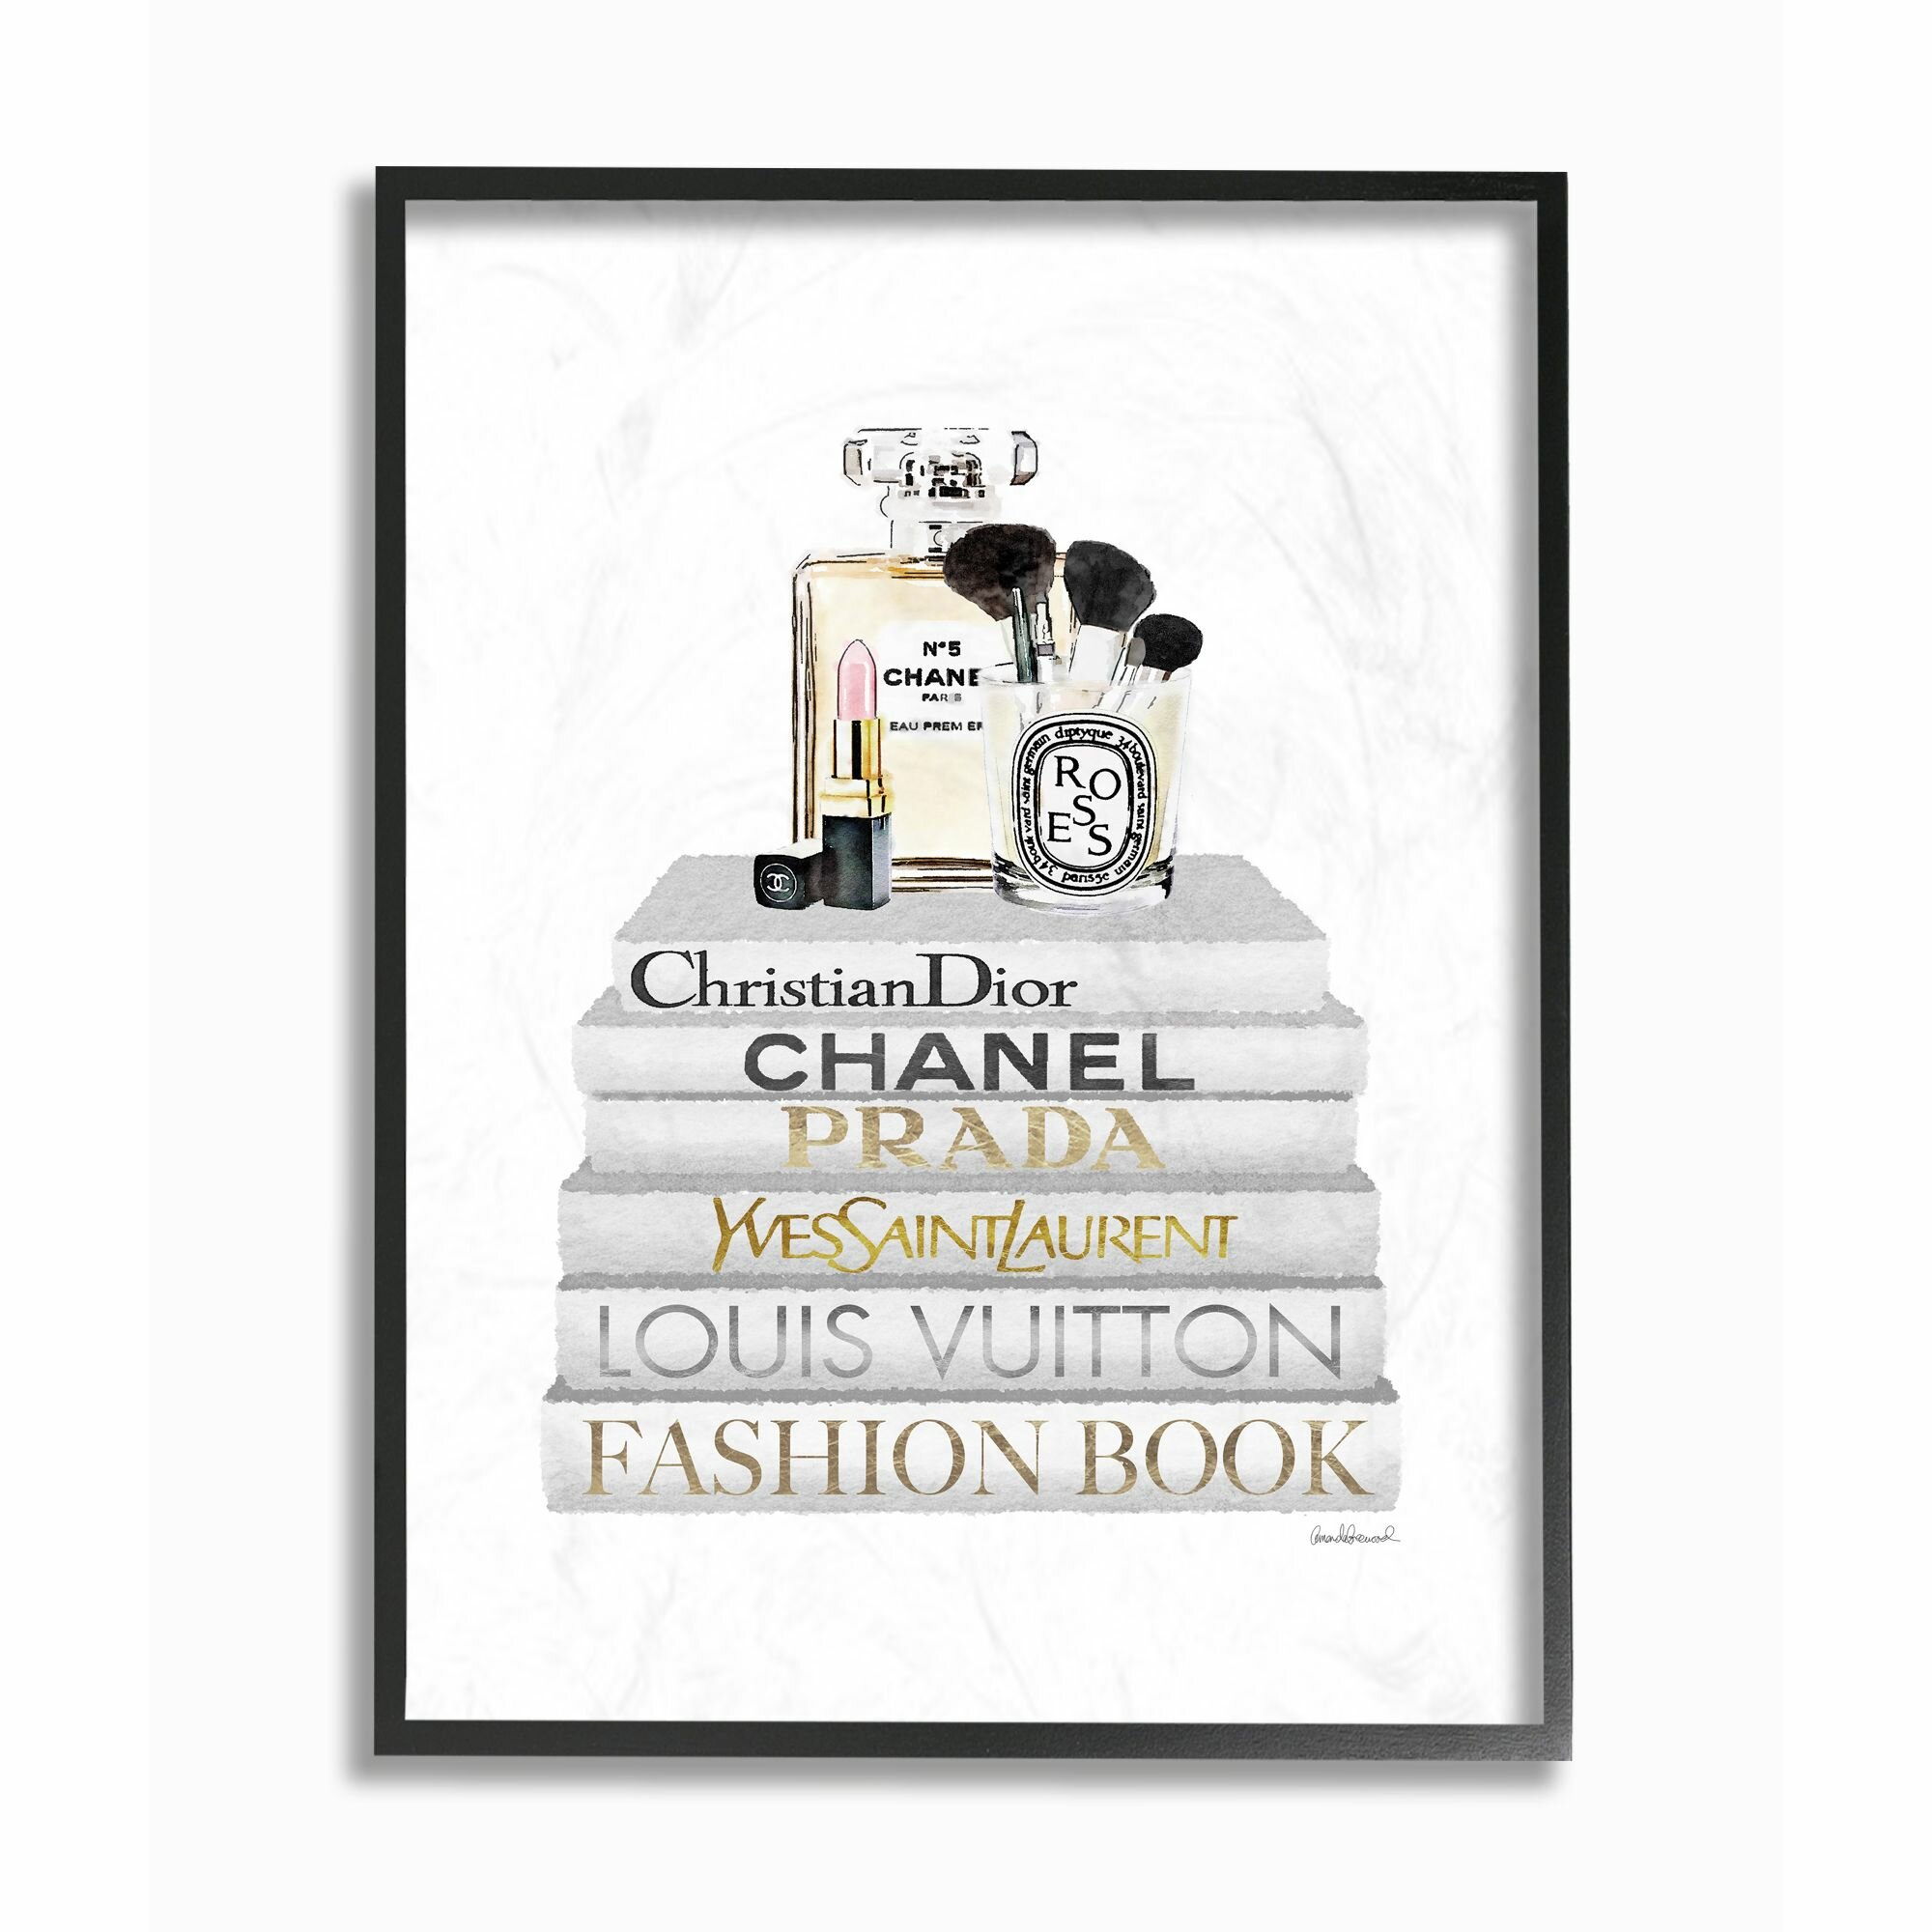 Stupell Industries Fashion Designer Purse Bookstack Black and White Watercolor Framed Wall Art by Amanda Greenwood